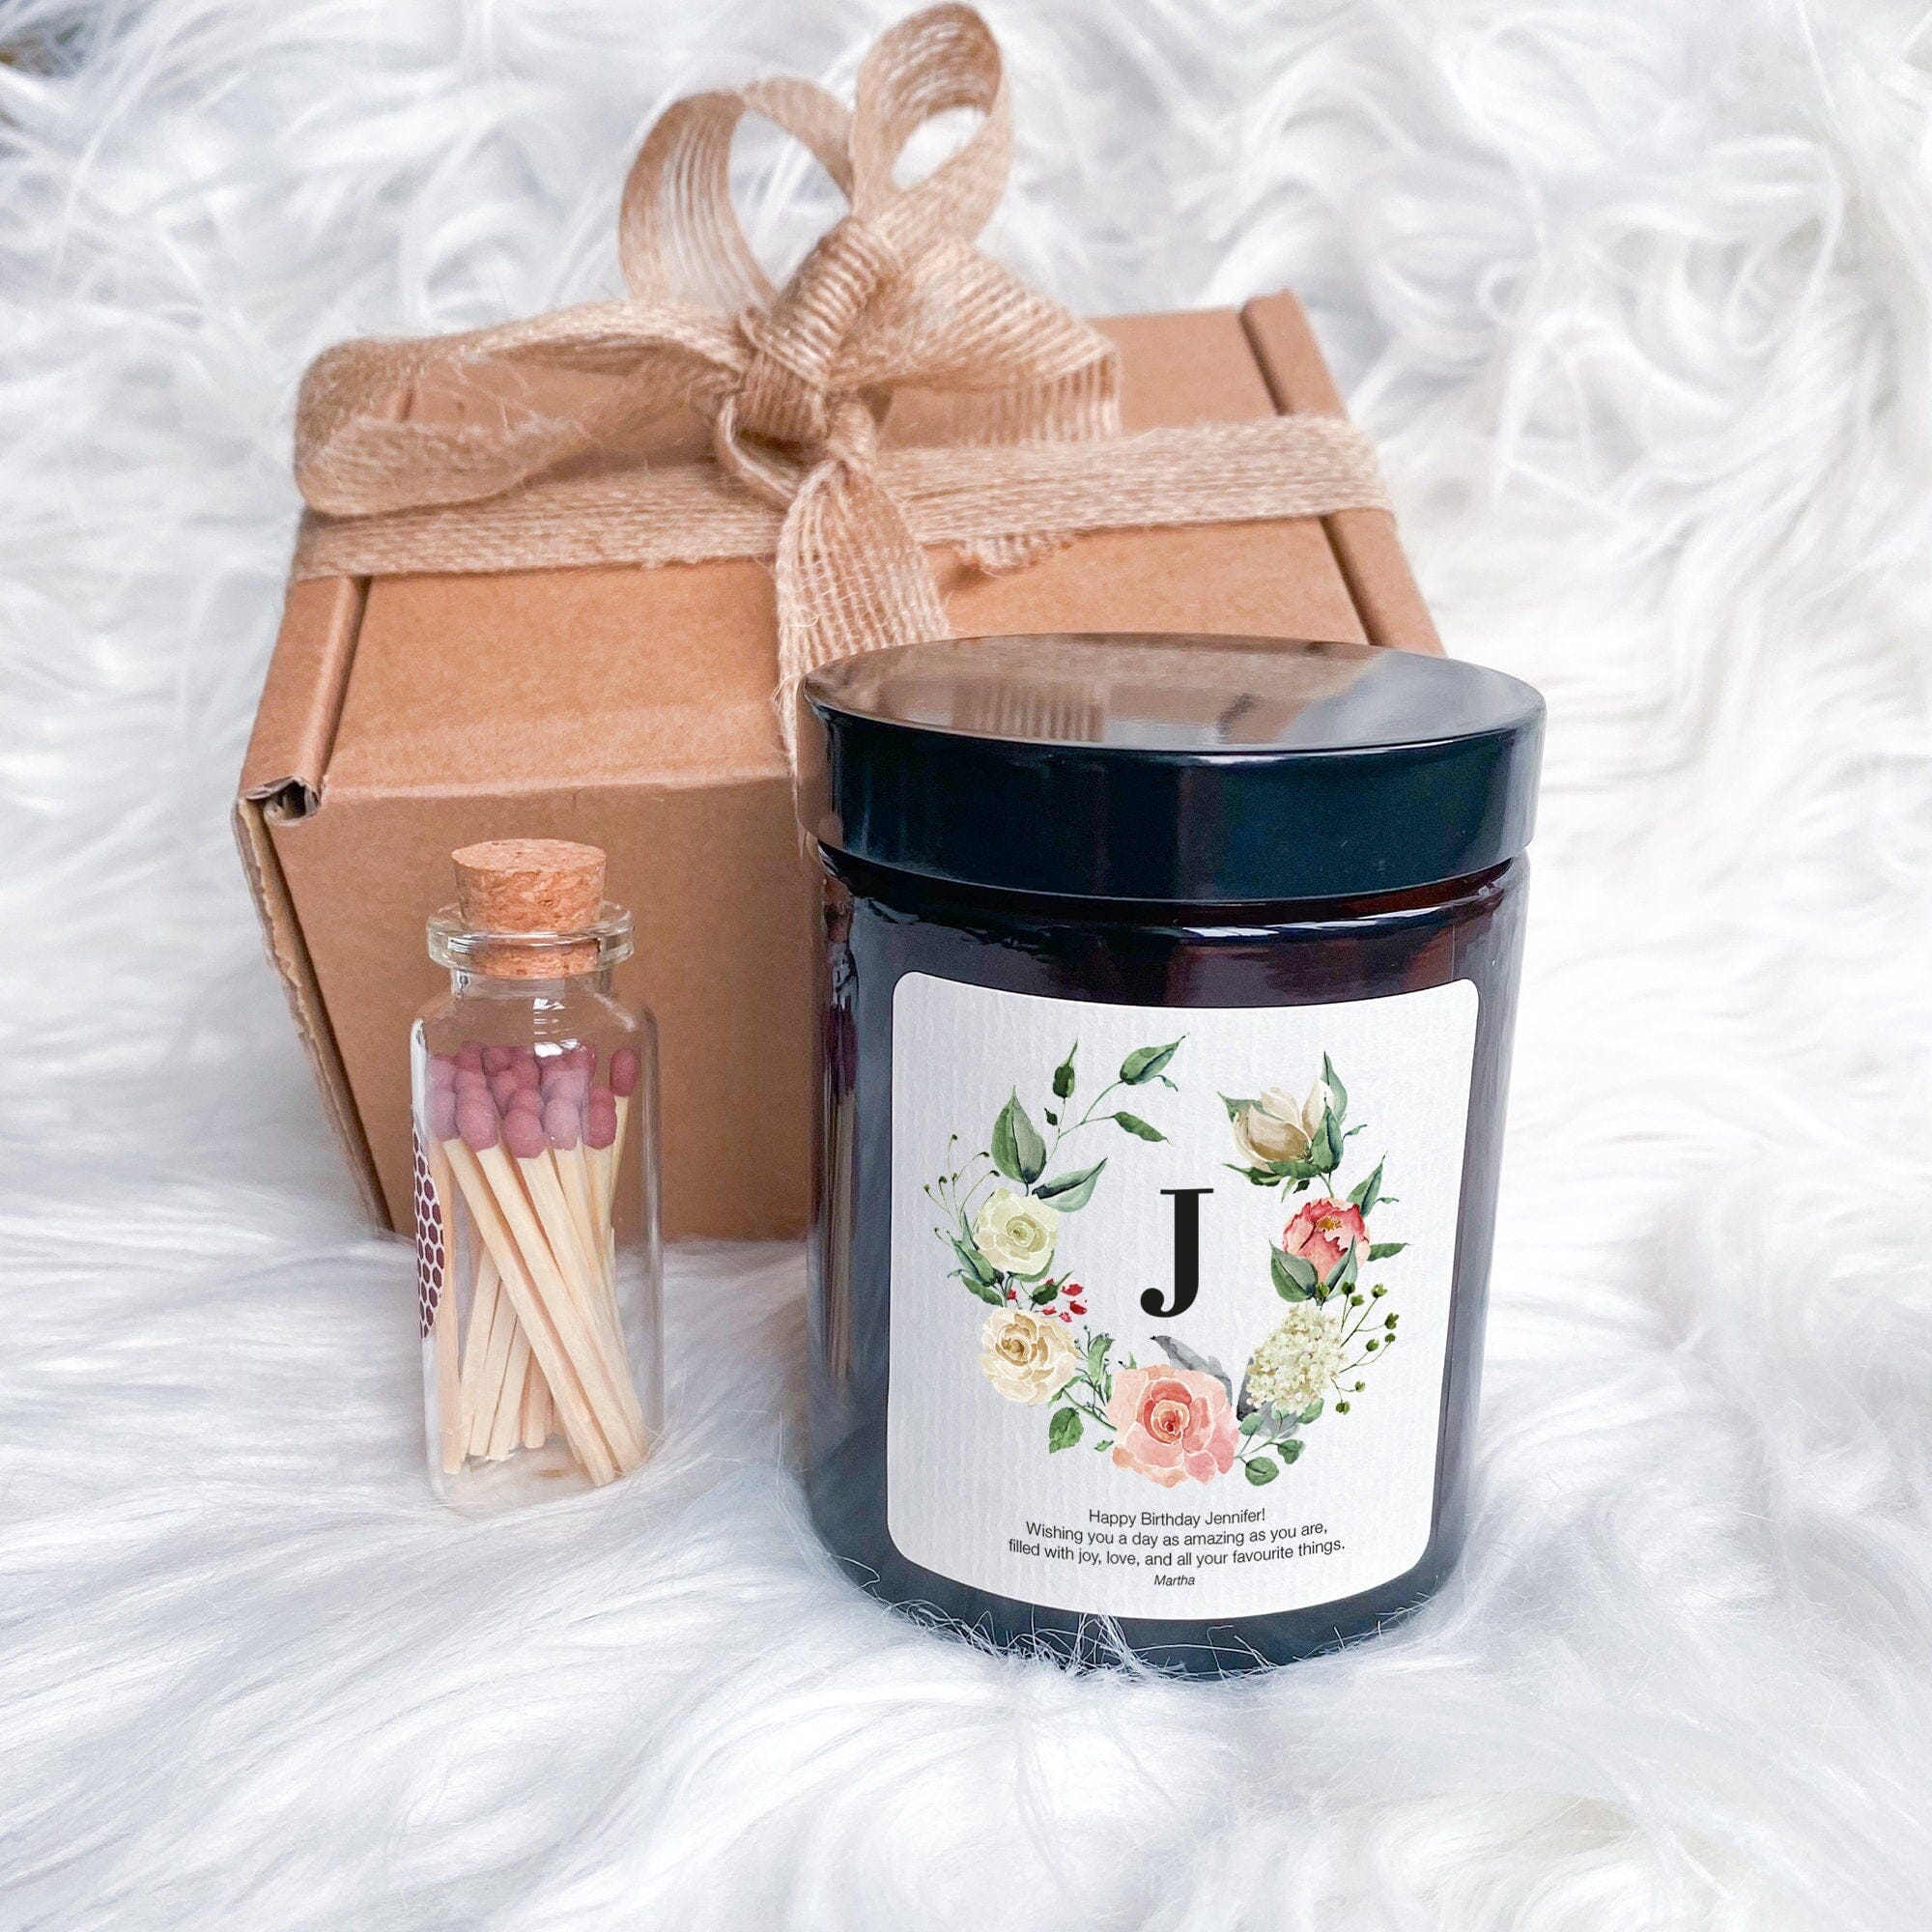 Personalised Scented Candle with Initial and Your Text, Gift Box for Her Him, Birthday Christmas New Job Graduation